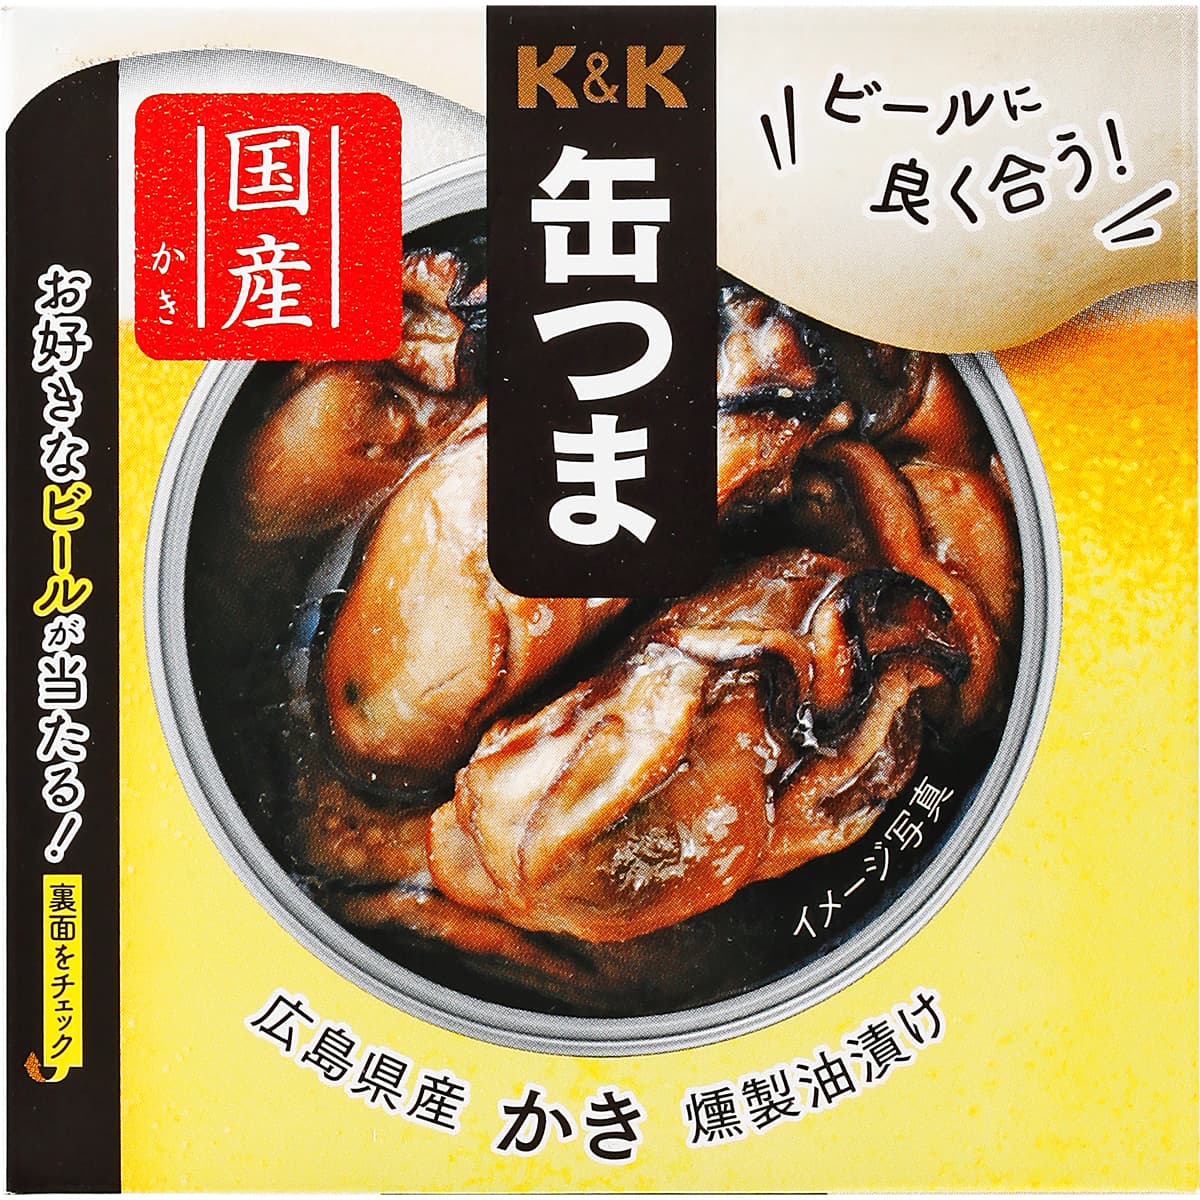 K&amp;K Canned Tsuma from Hiroshima prefecture smoked oysters pickled in oil (limited time beer package)